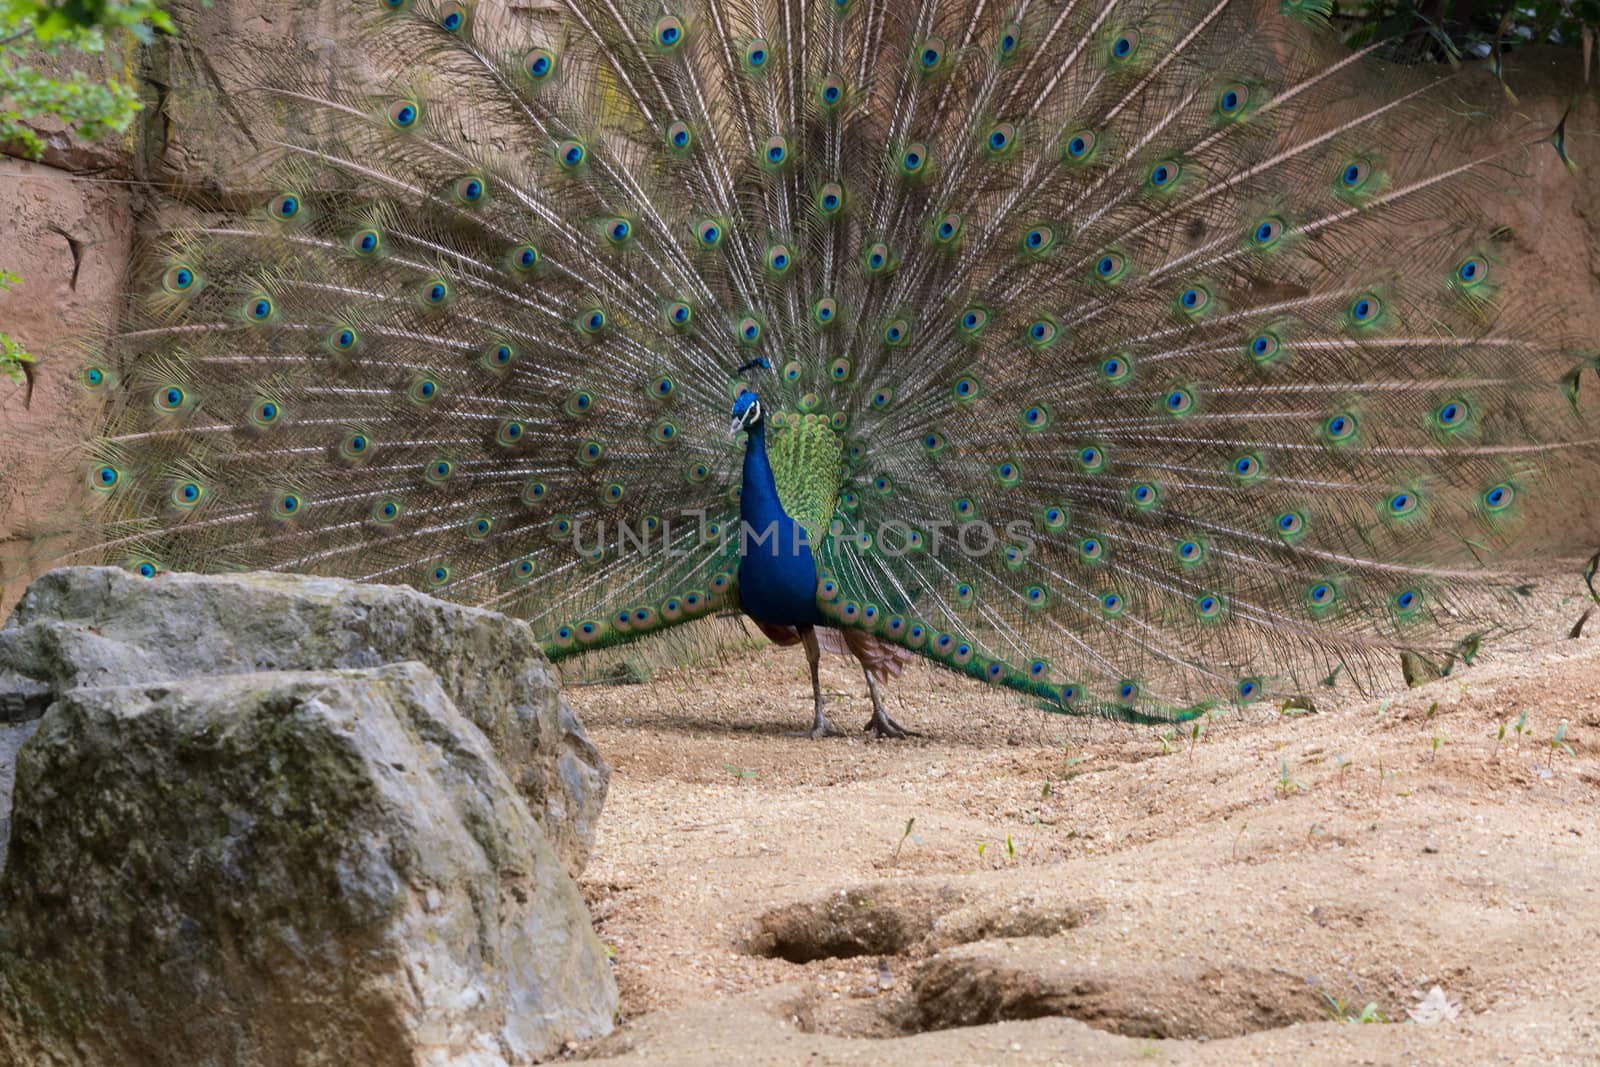 Adult male peacock displaying colorful feathers, portrait of an adult male peacock displaying his feathers